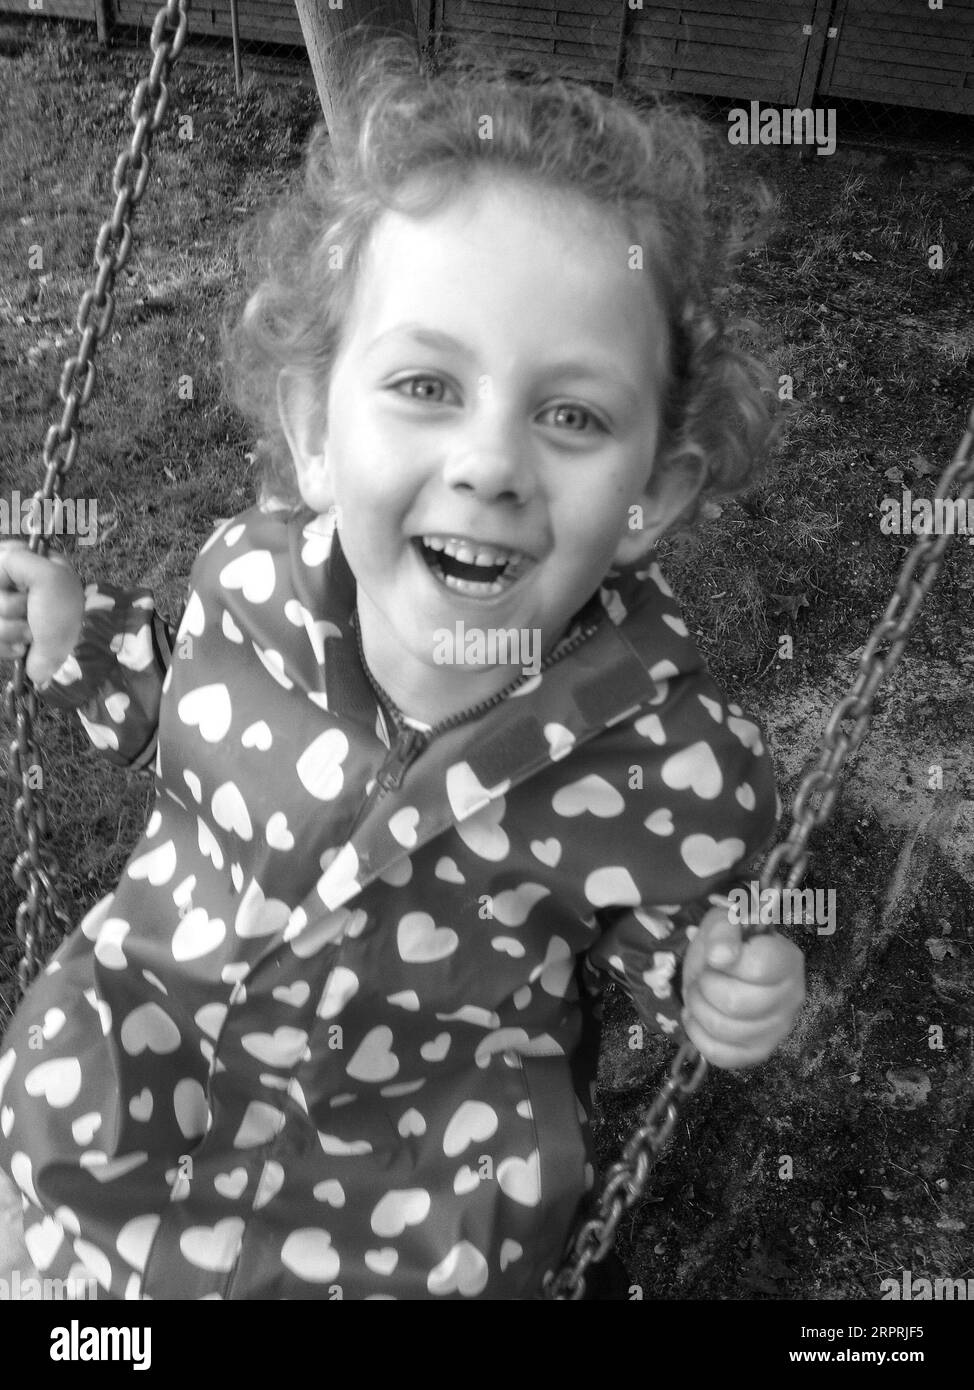 black-and-white-portrait-of-a-5-year-old-blond-girl-on-a-swing-stock